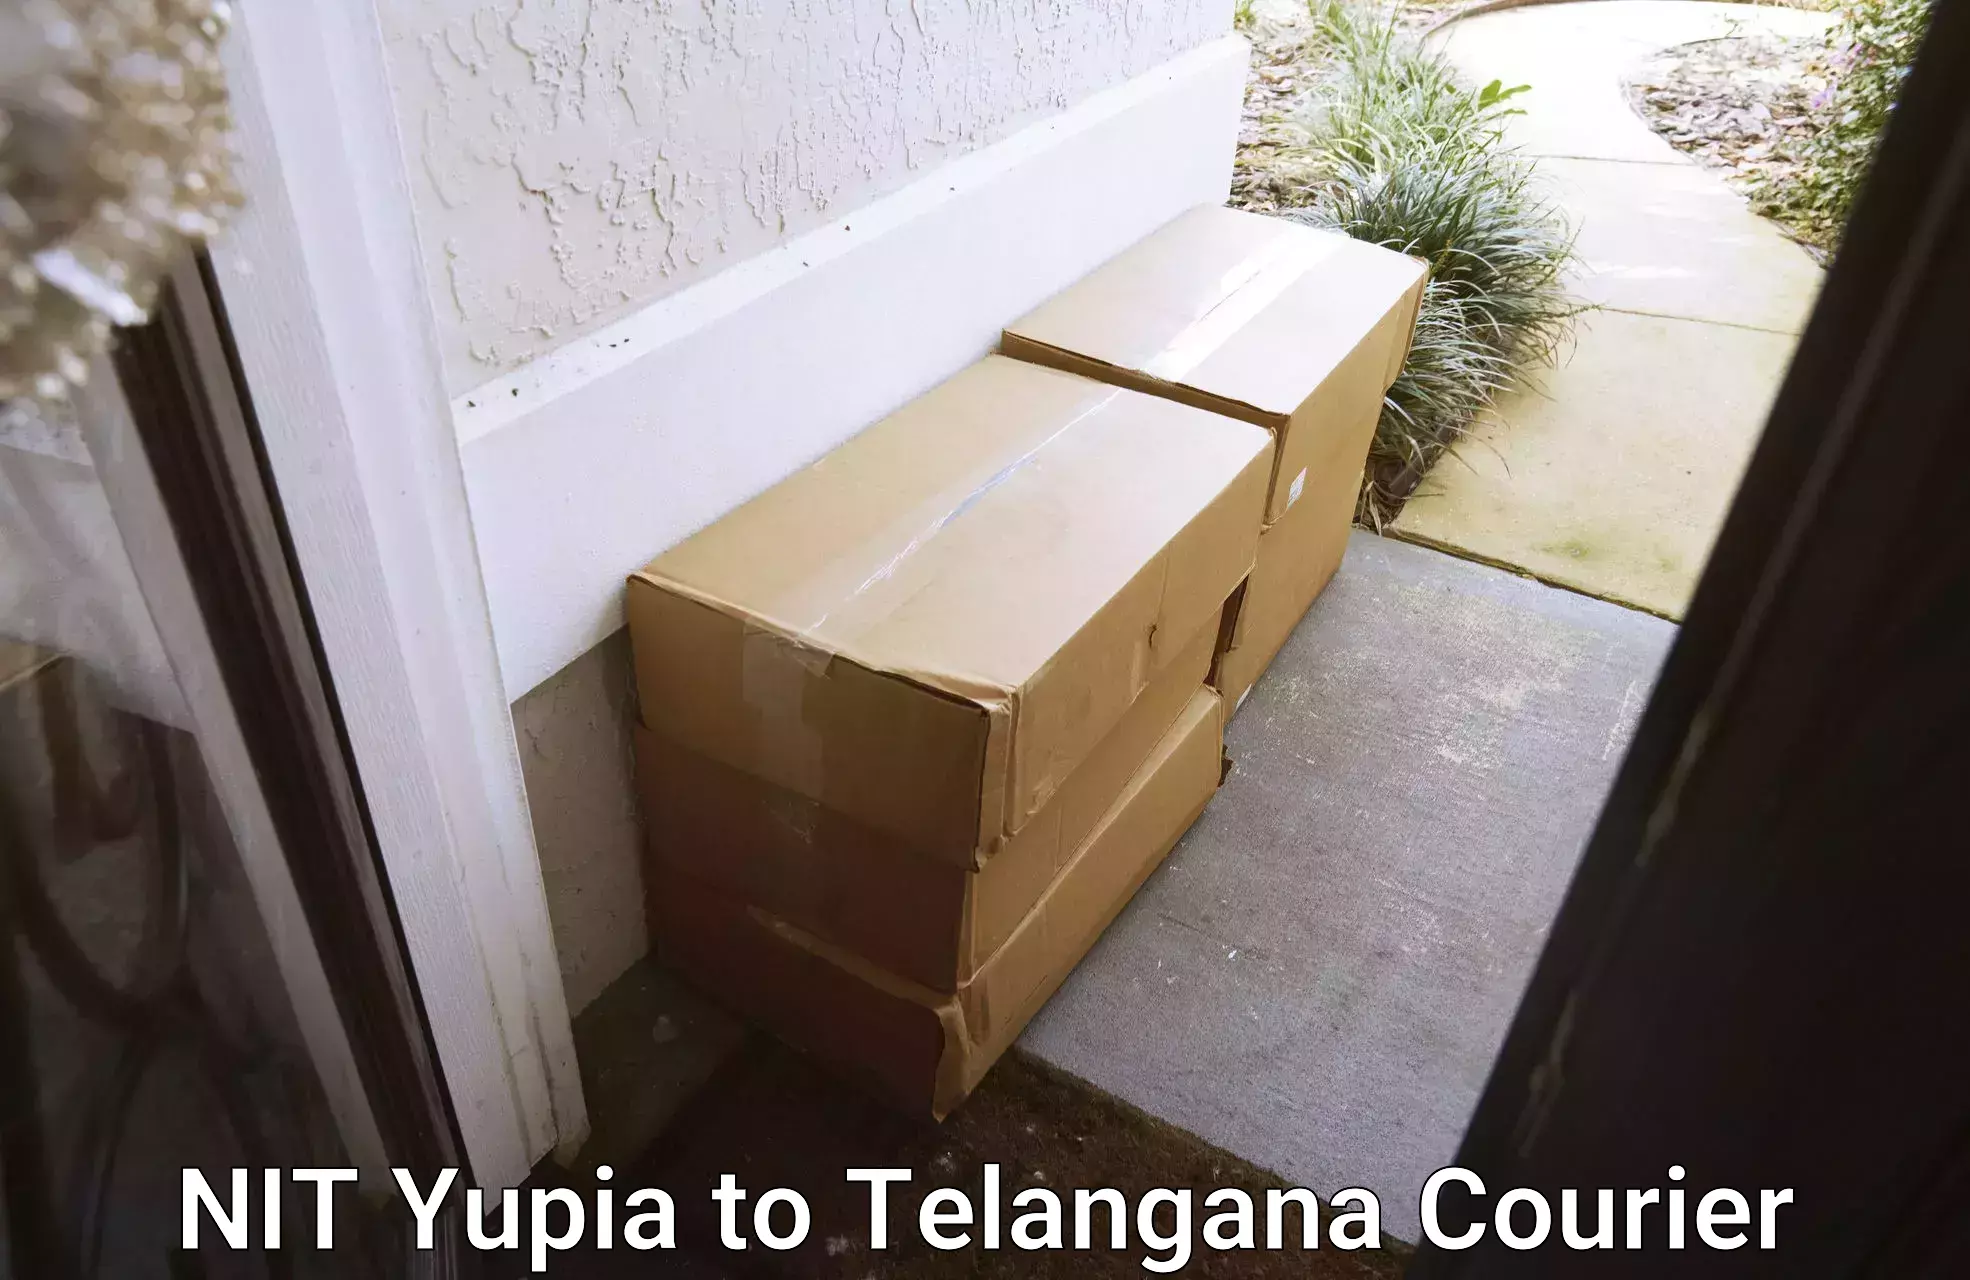 Residential courier service NIT Yupia to Mancherial